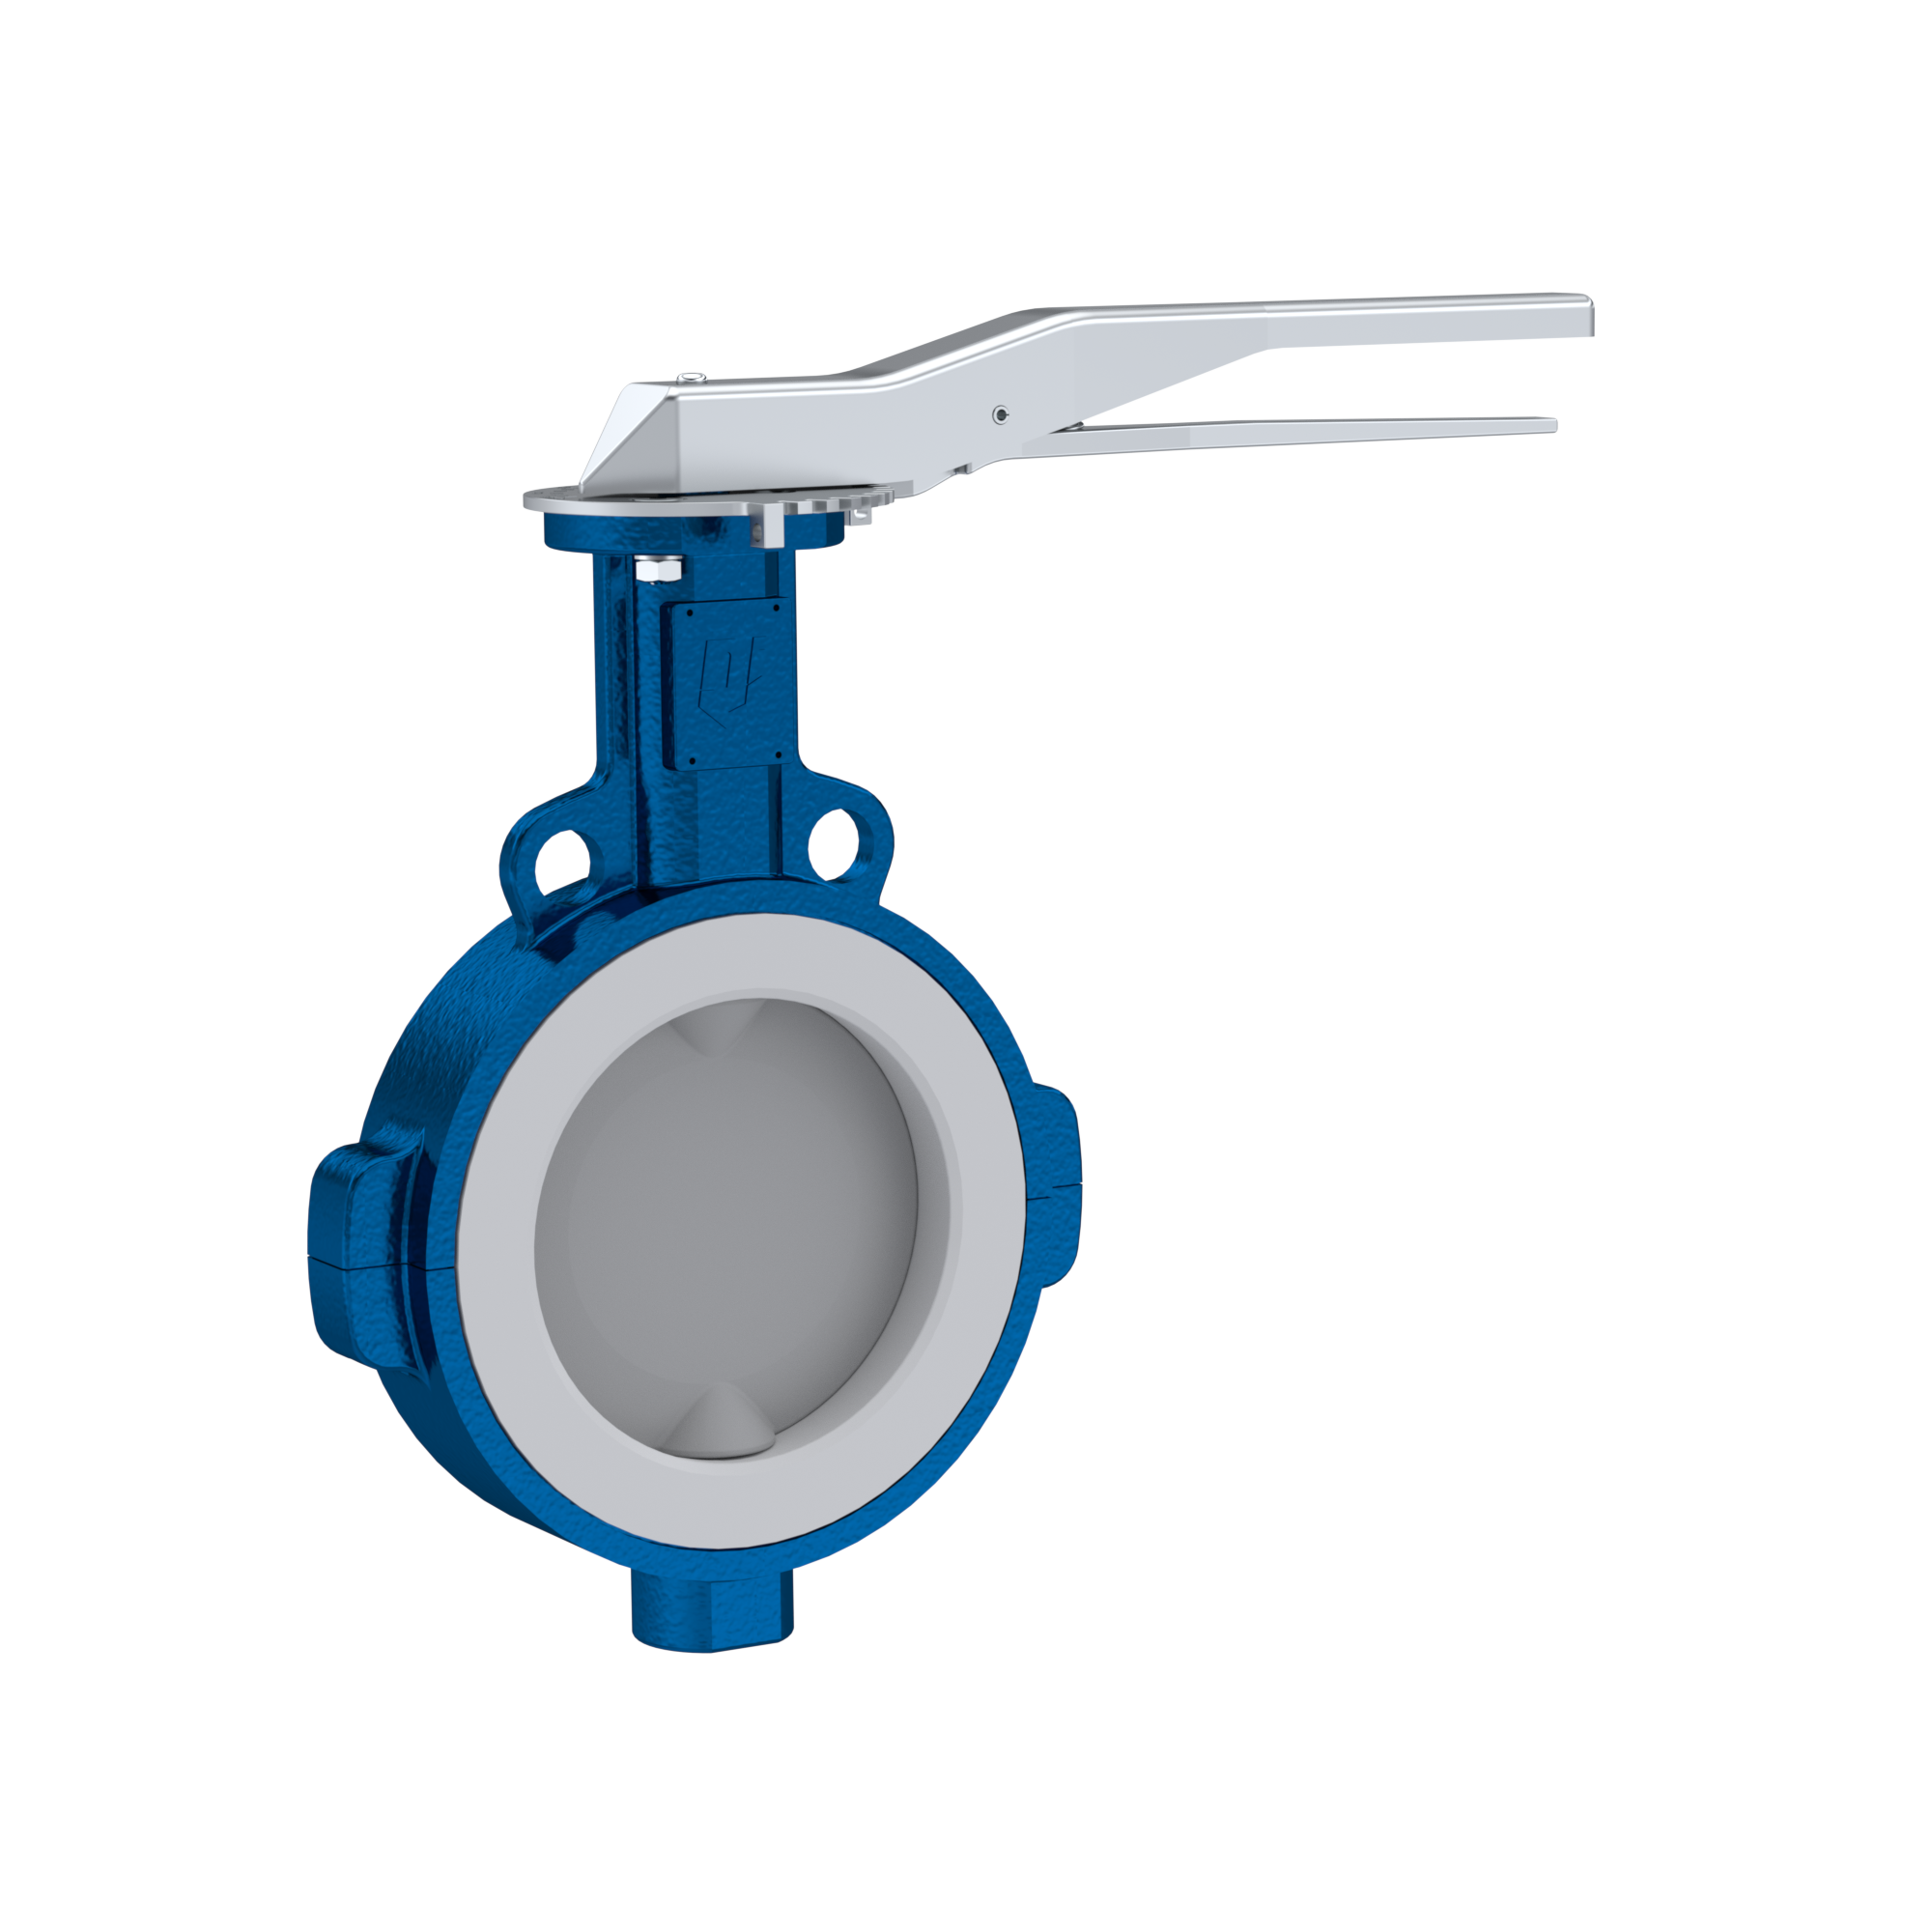 PFA-Butterfly-valve PTFE AK09 DN125 PN10-PN16 lever silicone insert